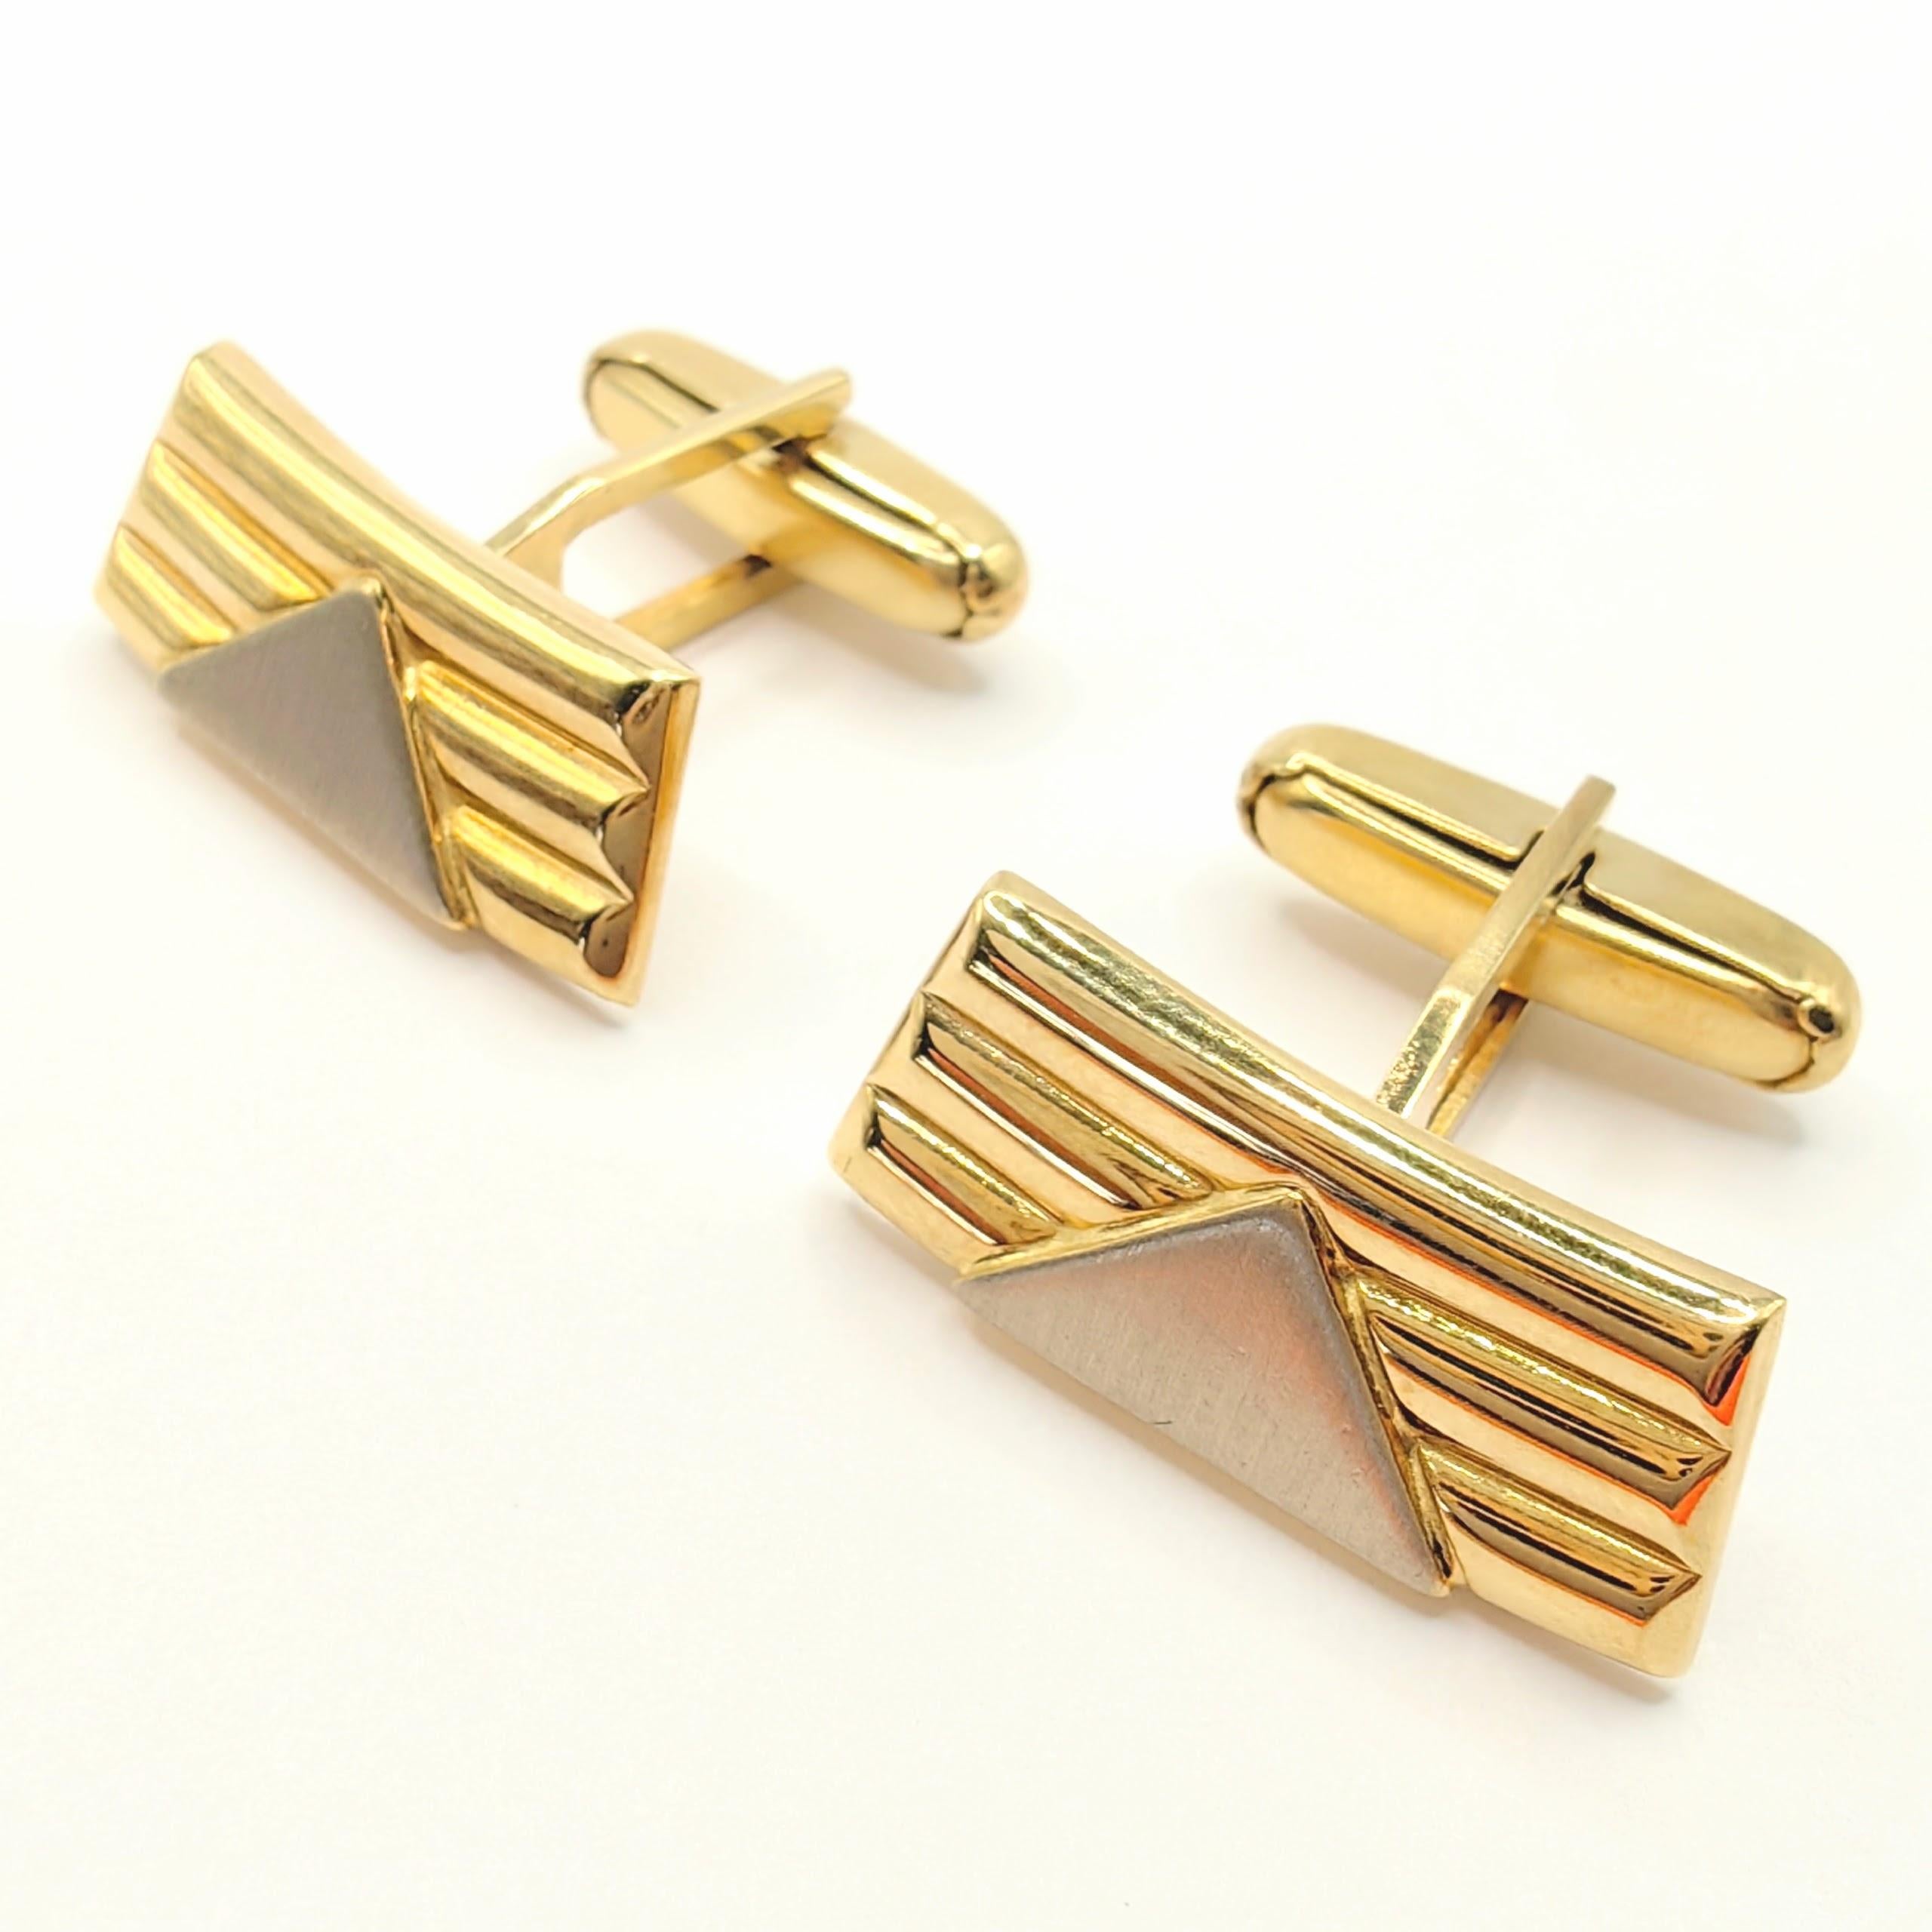 Introducing our Vintage Fan Shape 18K Yellow & White Two-tone Gold Cufflinks and Tie Clip Set, a luxurious ensemble that exudes elegance and sophistication, perfect for elevating your formal attire.

Crafted with meticulous attention to detail, the